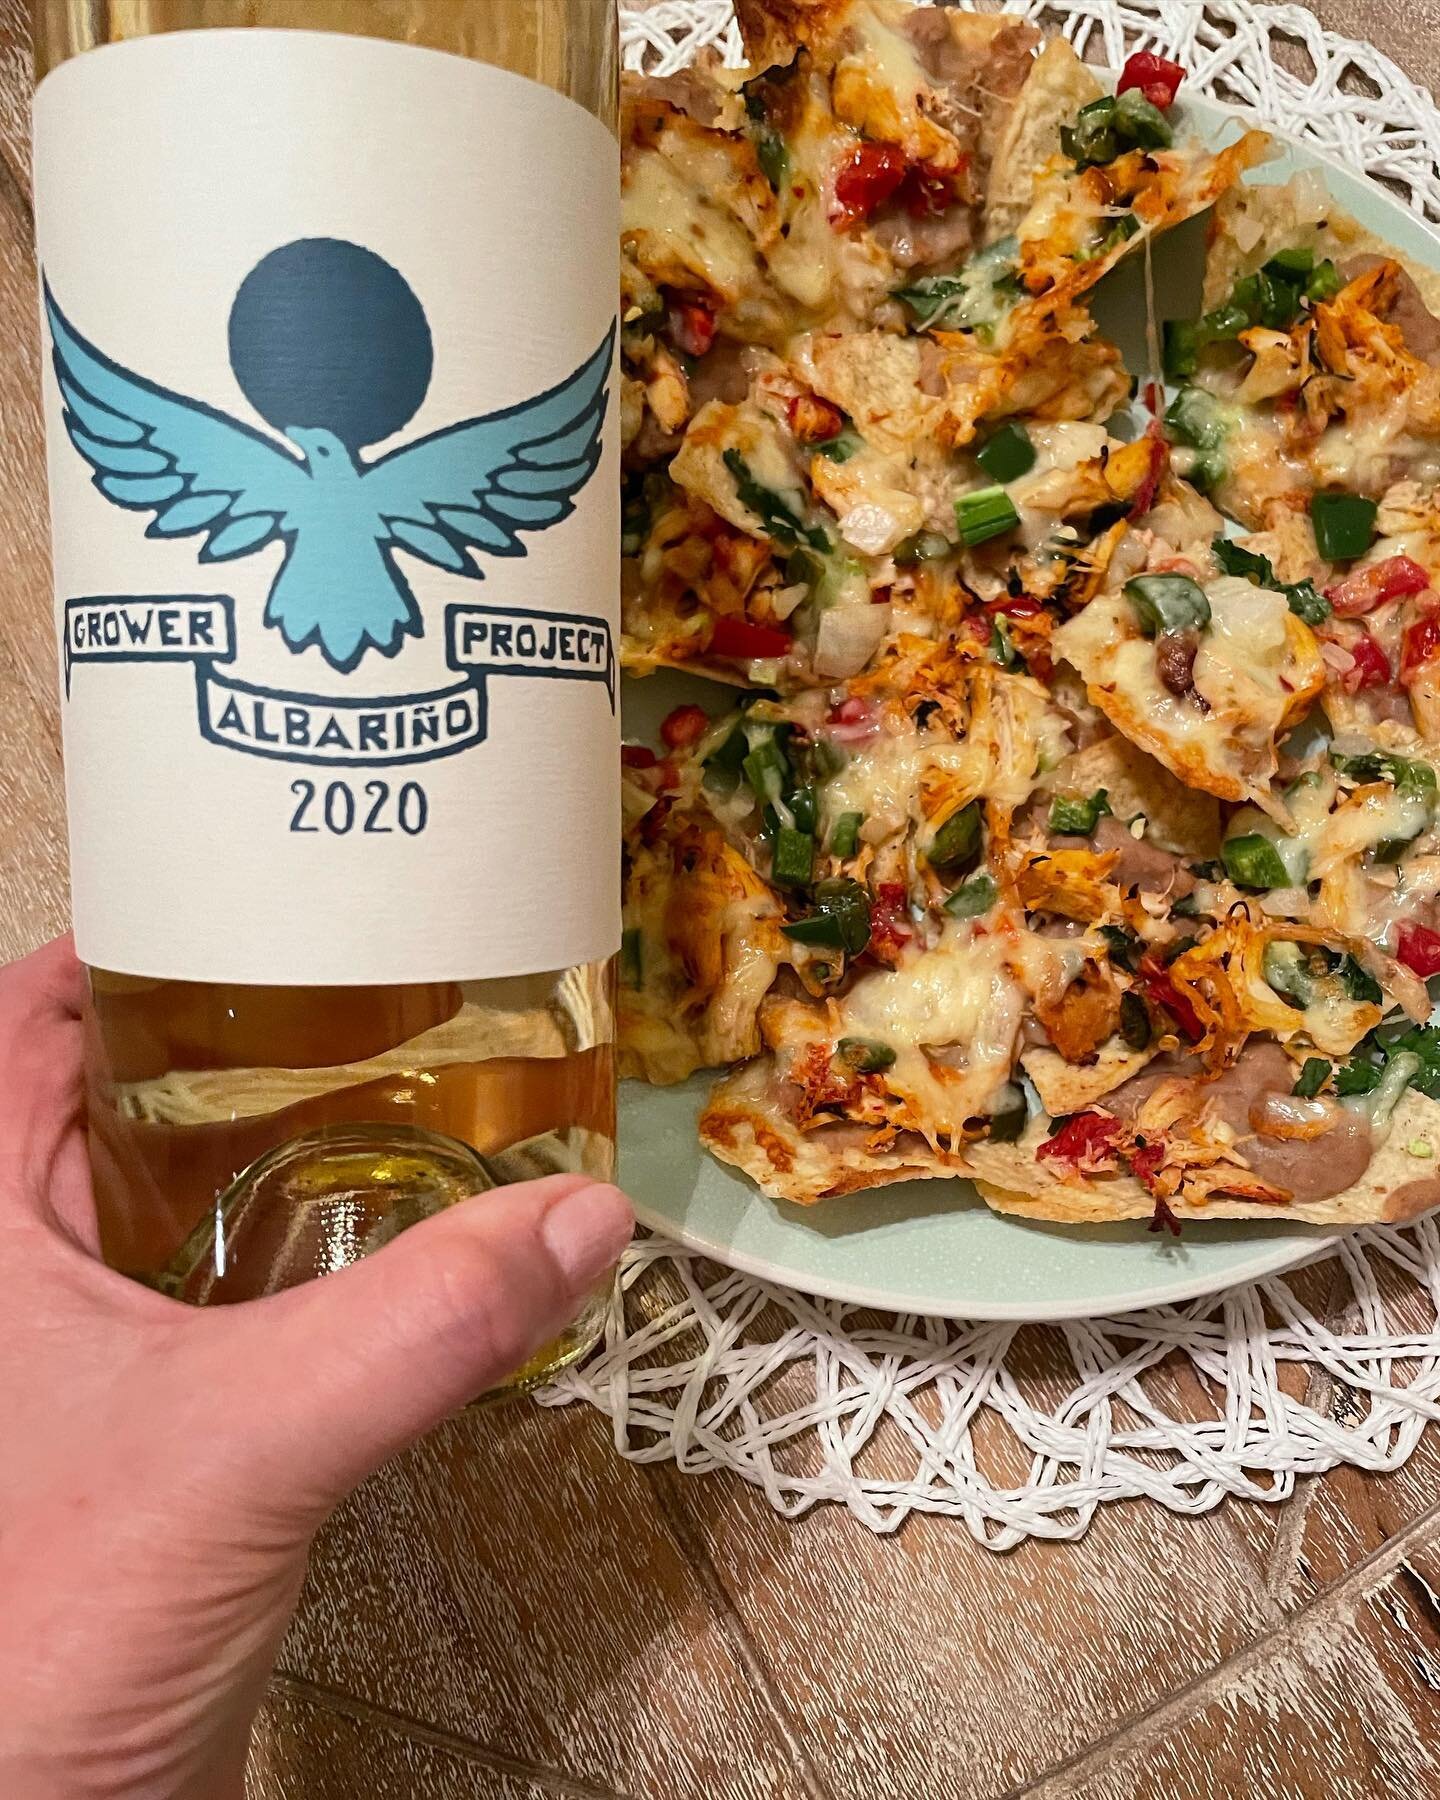 What vino would you pair with with nachos? 

🥘Tonight I&rsquo;m pairing these homemade chicken nachos with the Texas 2020 Grower Project Alabri&ntilde;o @thegrowerproject 🍋 Fantastic acidity and citrusy notes perfect with any spicy Mexican cuisine
